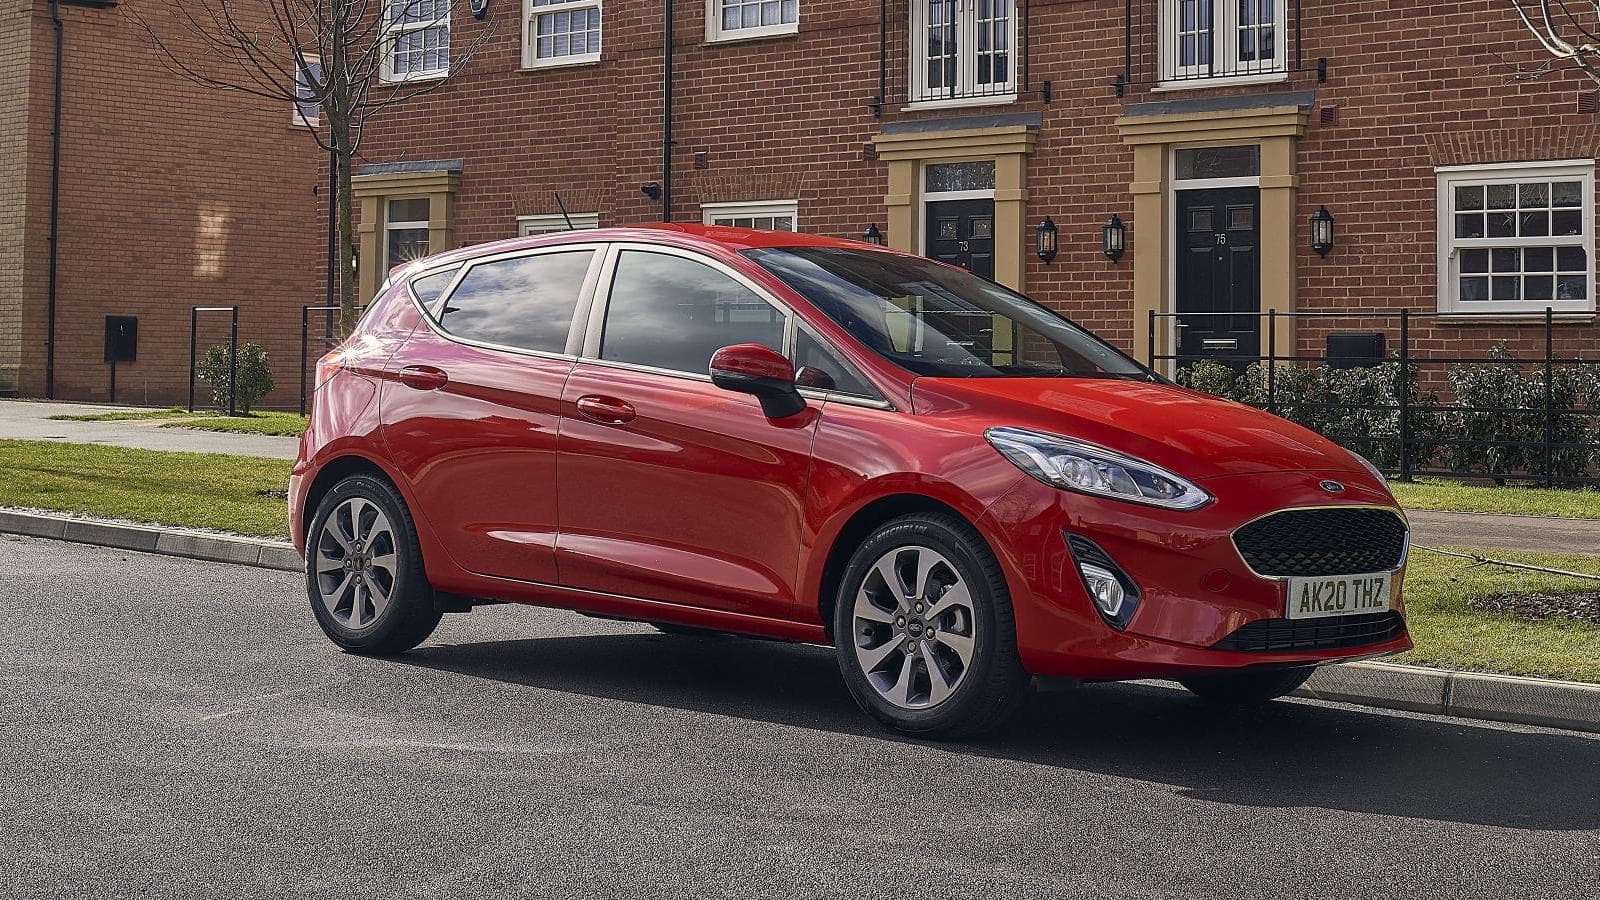 2020 Ford Fiesta, red